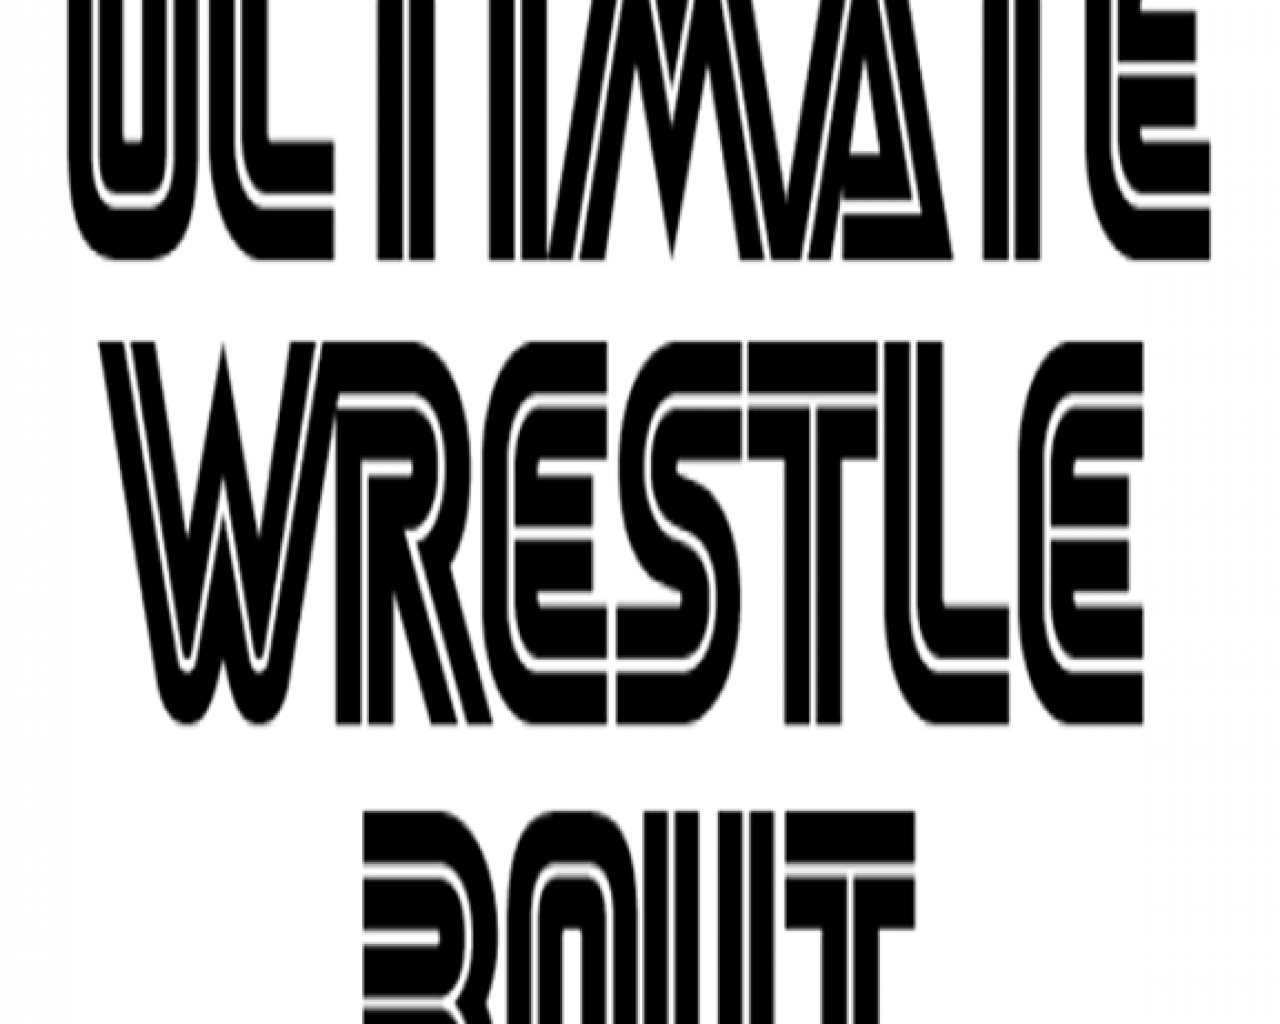 Poster Image for Ultimate Wrestle Bout